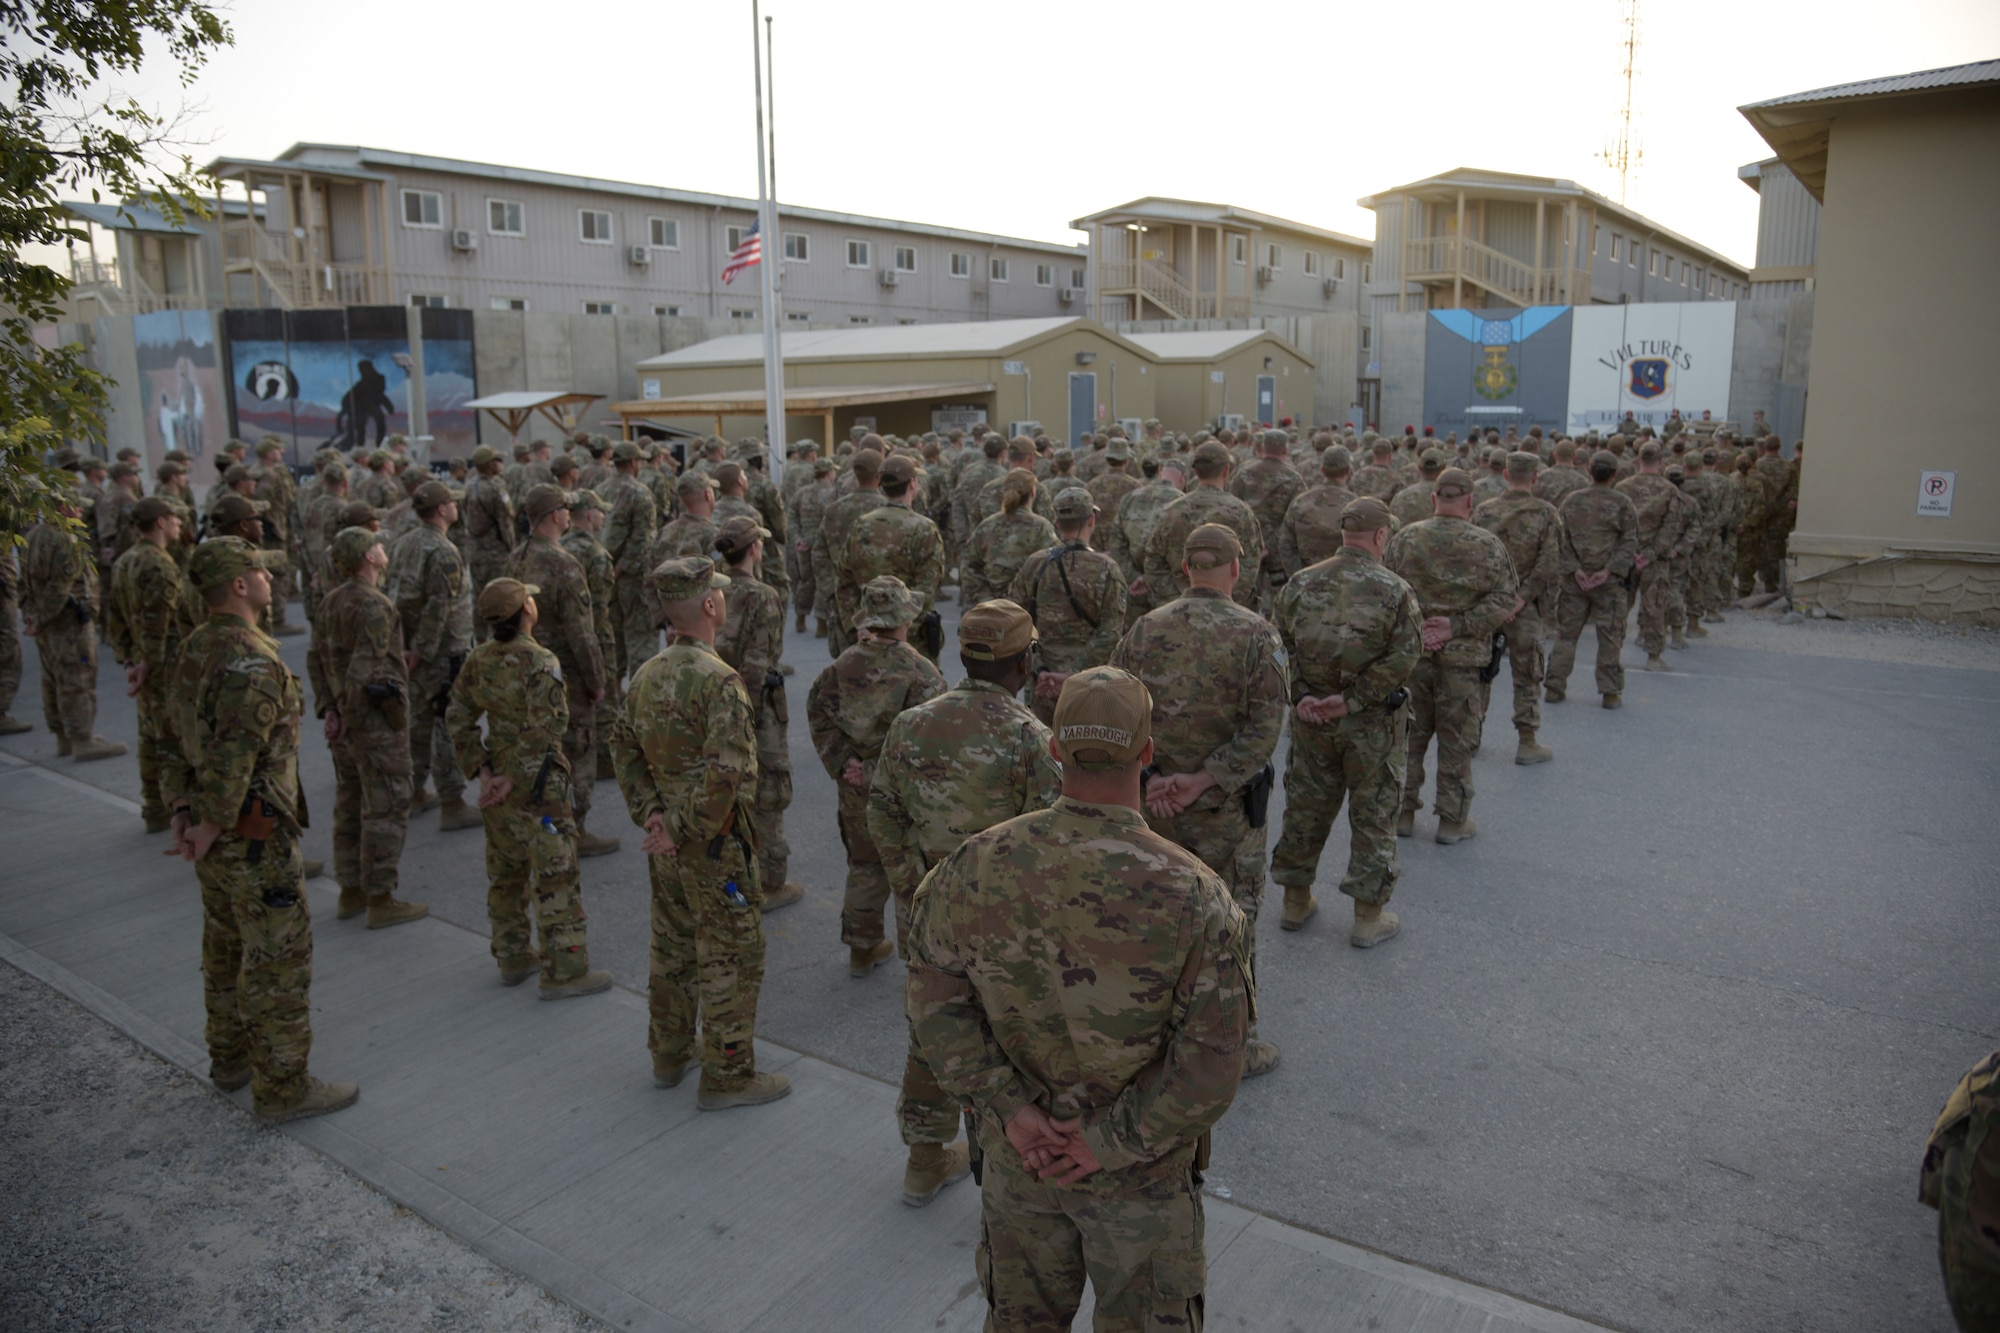 Bagram team members gather in Memorial Courtyard in remembrance of Medal of Honor recipient, U.S. Air Force Master Sgt. John Chapman during a ceremony on Bagram Airfield, Afghanistan, August 28, 2018. Chapman was posthumously awarded the MOH for his actions during the Battle of Takur Ghar, also known as Roberts Ridge, in Afghanistan in March 2002. (U.S. Air Force photo by Staff Sgt. Kristin High)